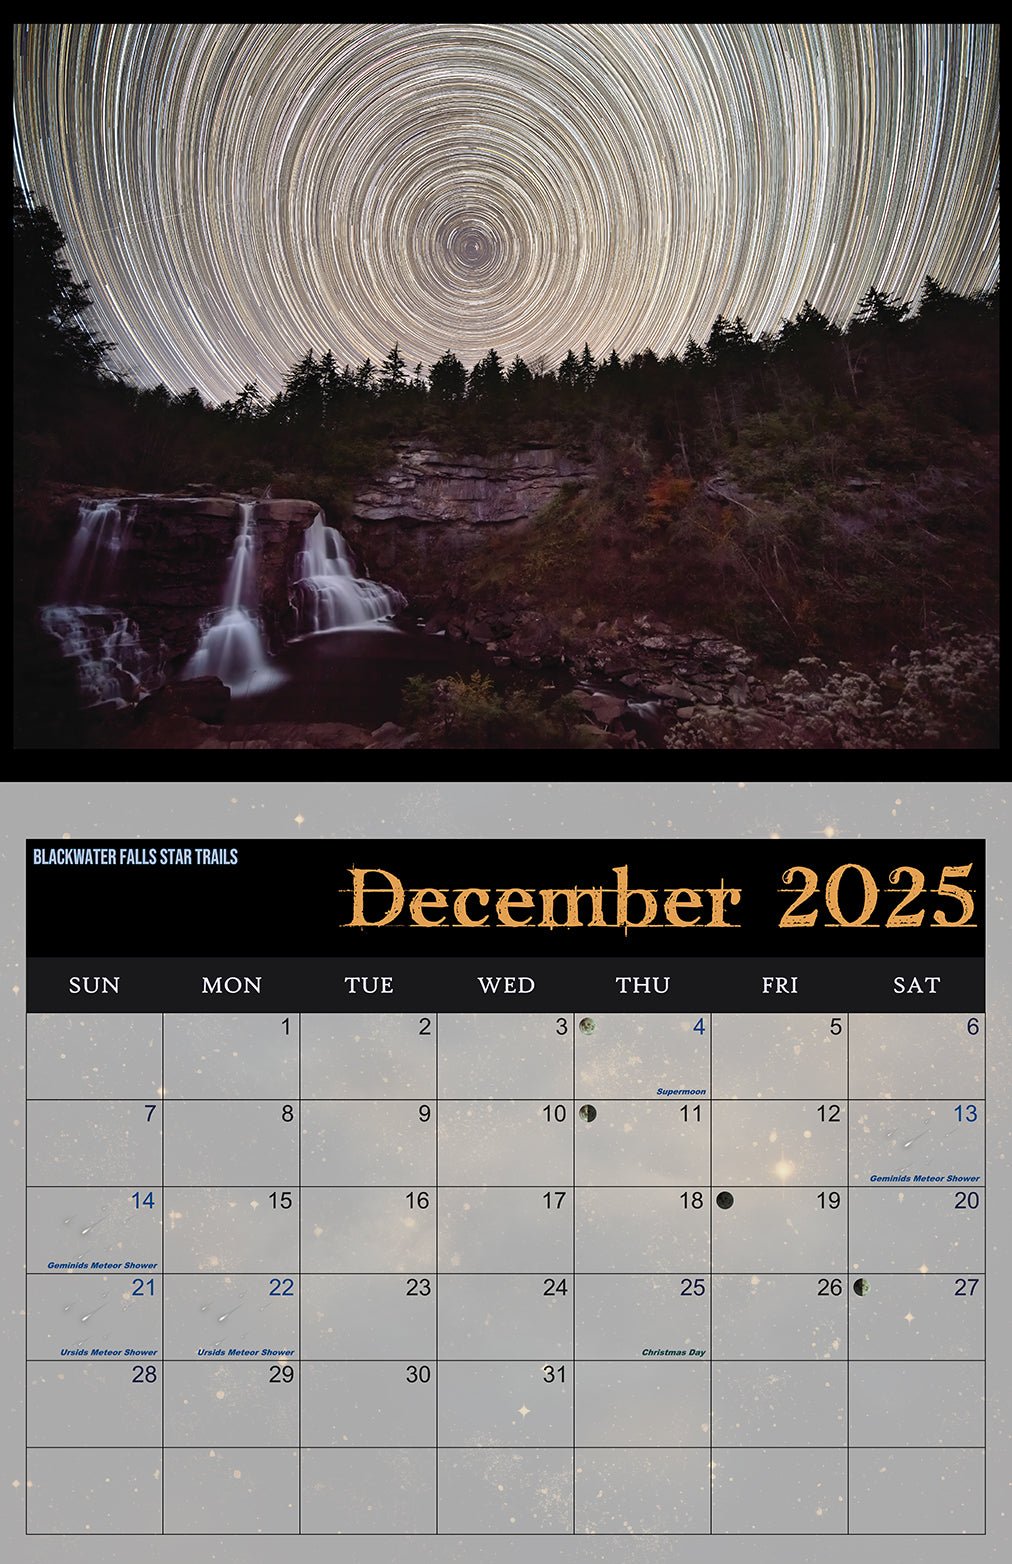 West Virginia Night Skies 2025 Wall Calendar 11x8.5 - WV Photography - Reflection in a Pool